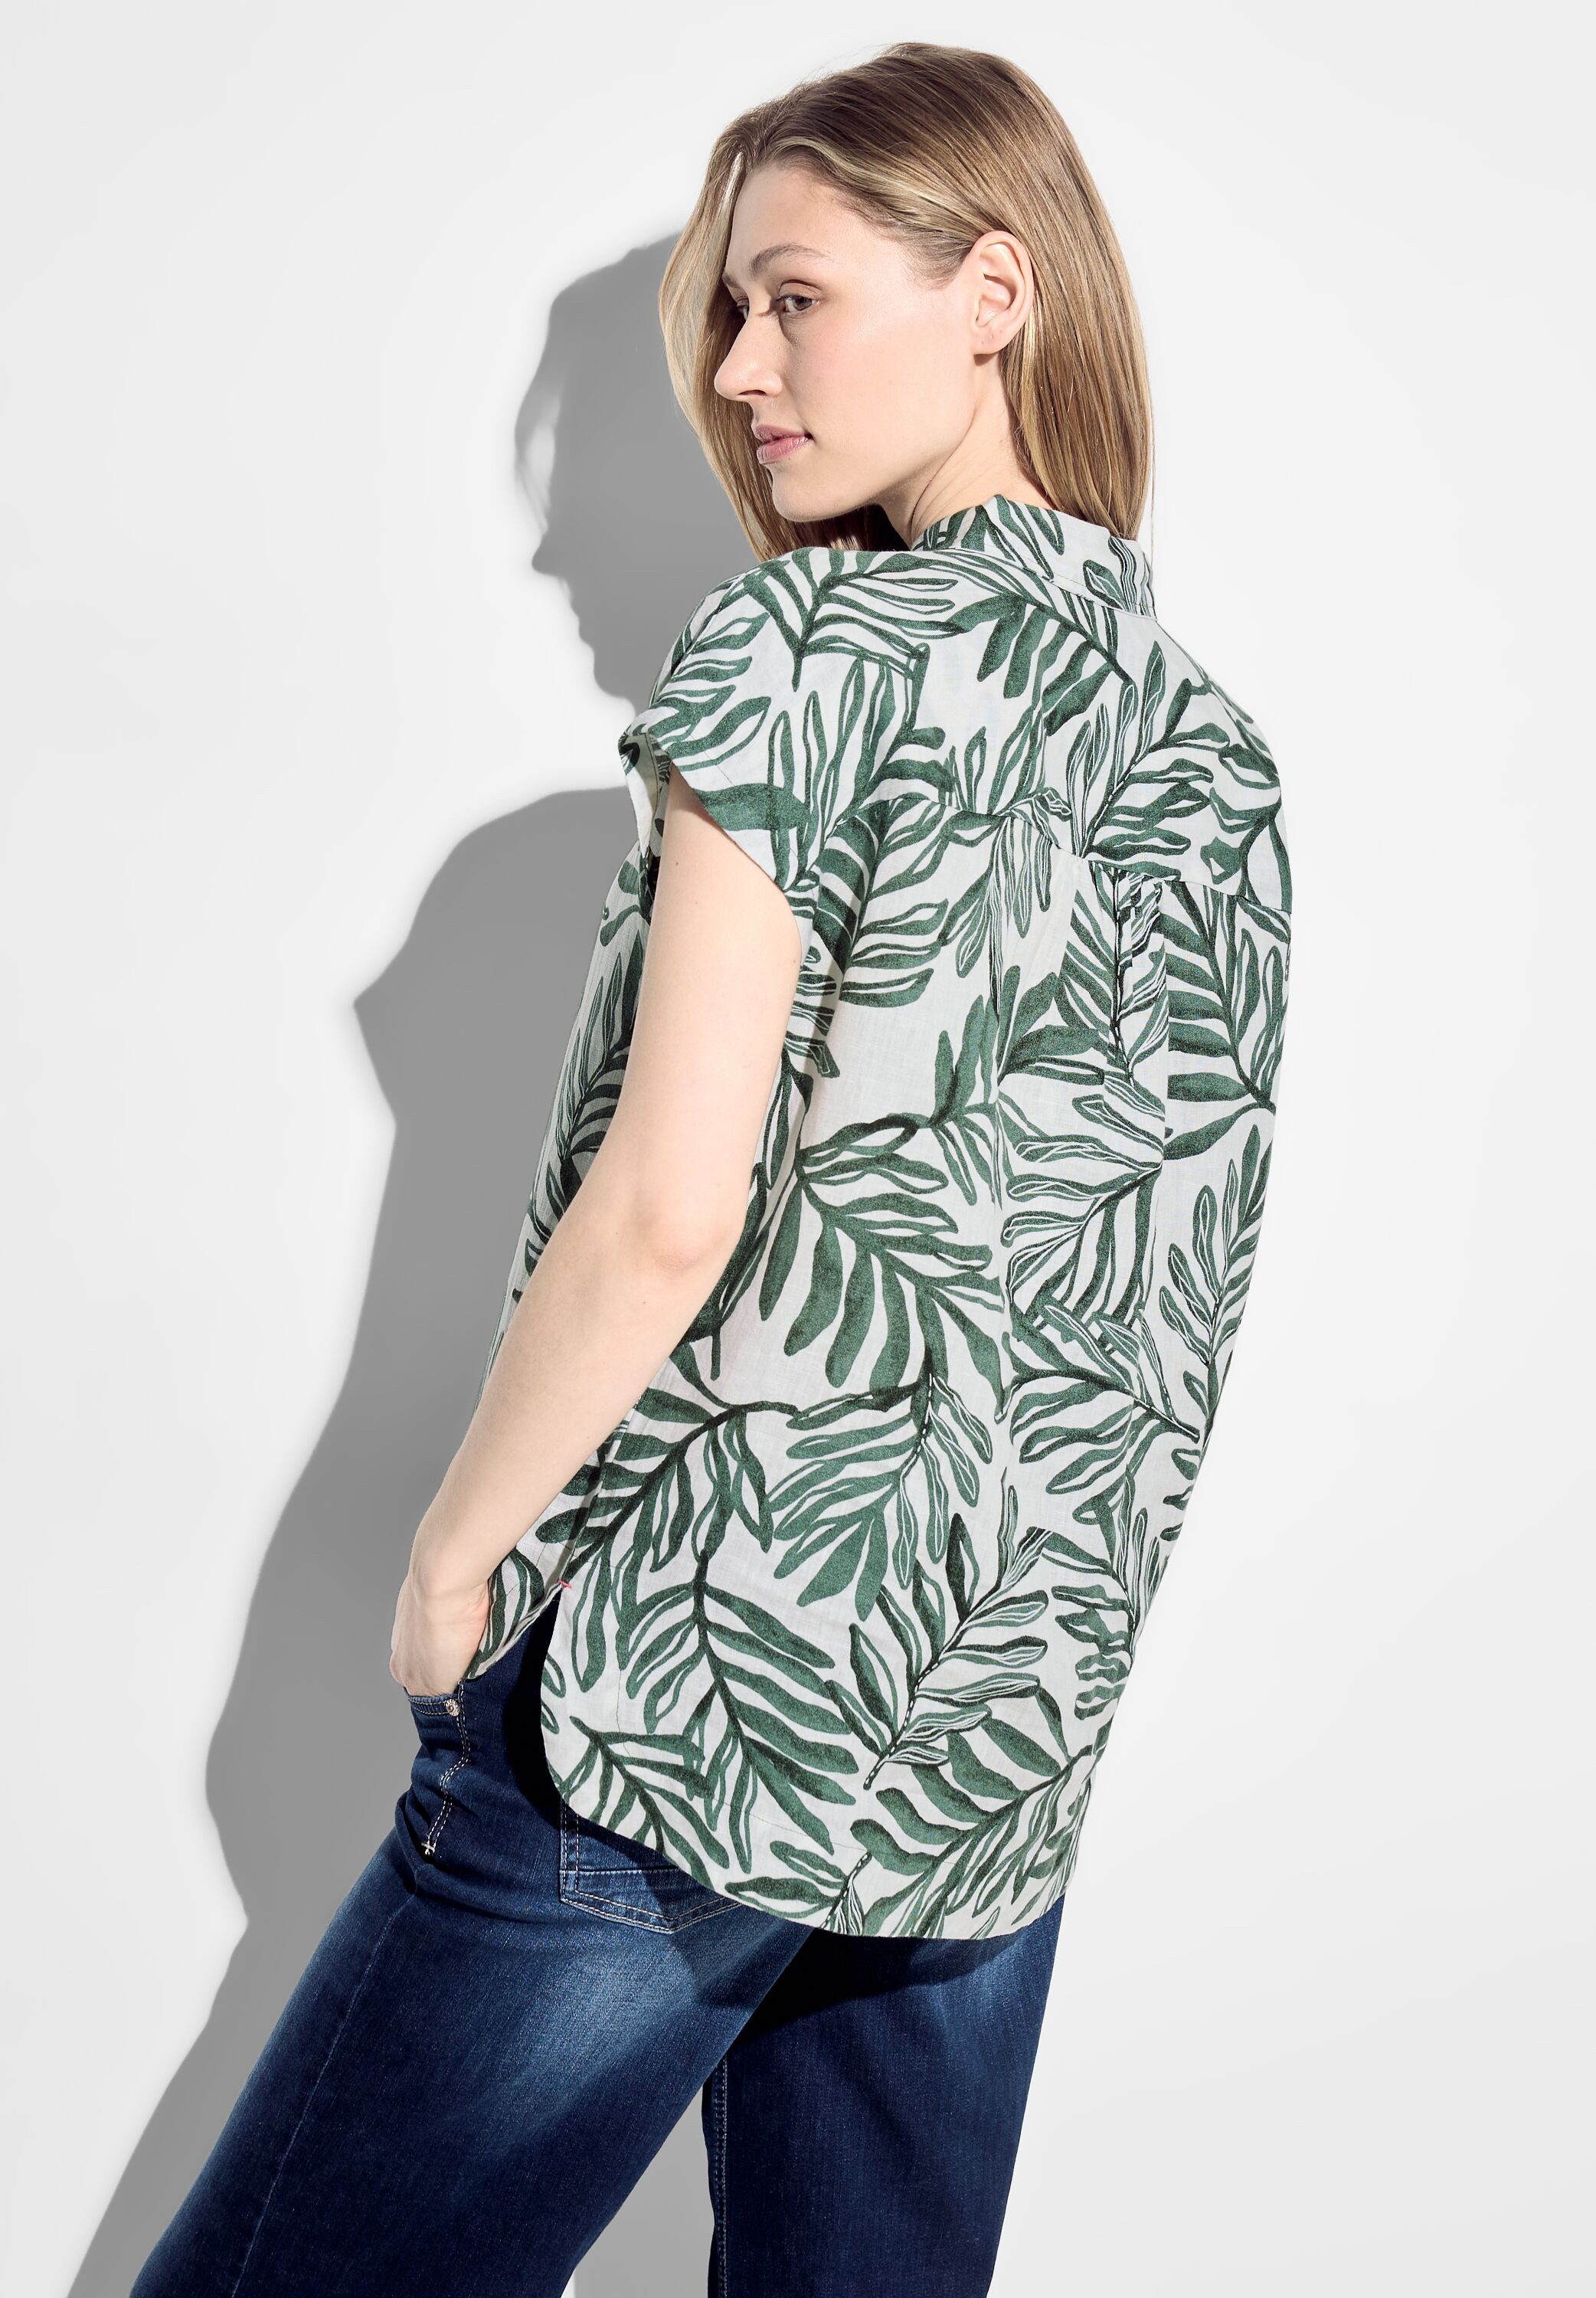 Cecil Overhemdblouse met print all-over